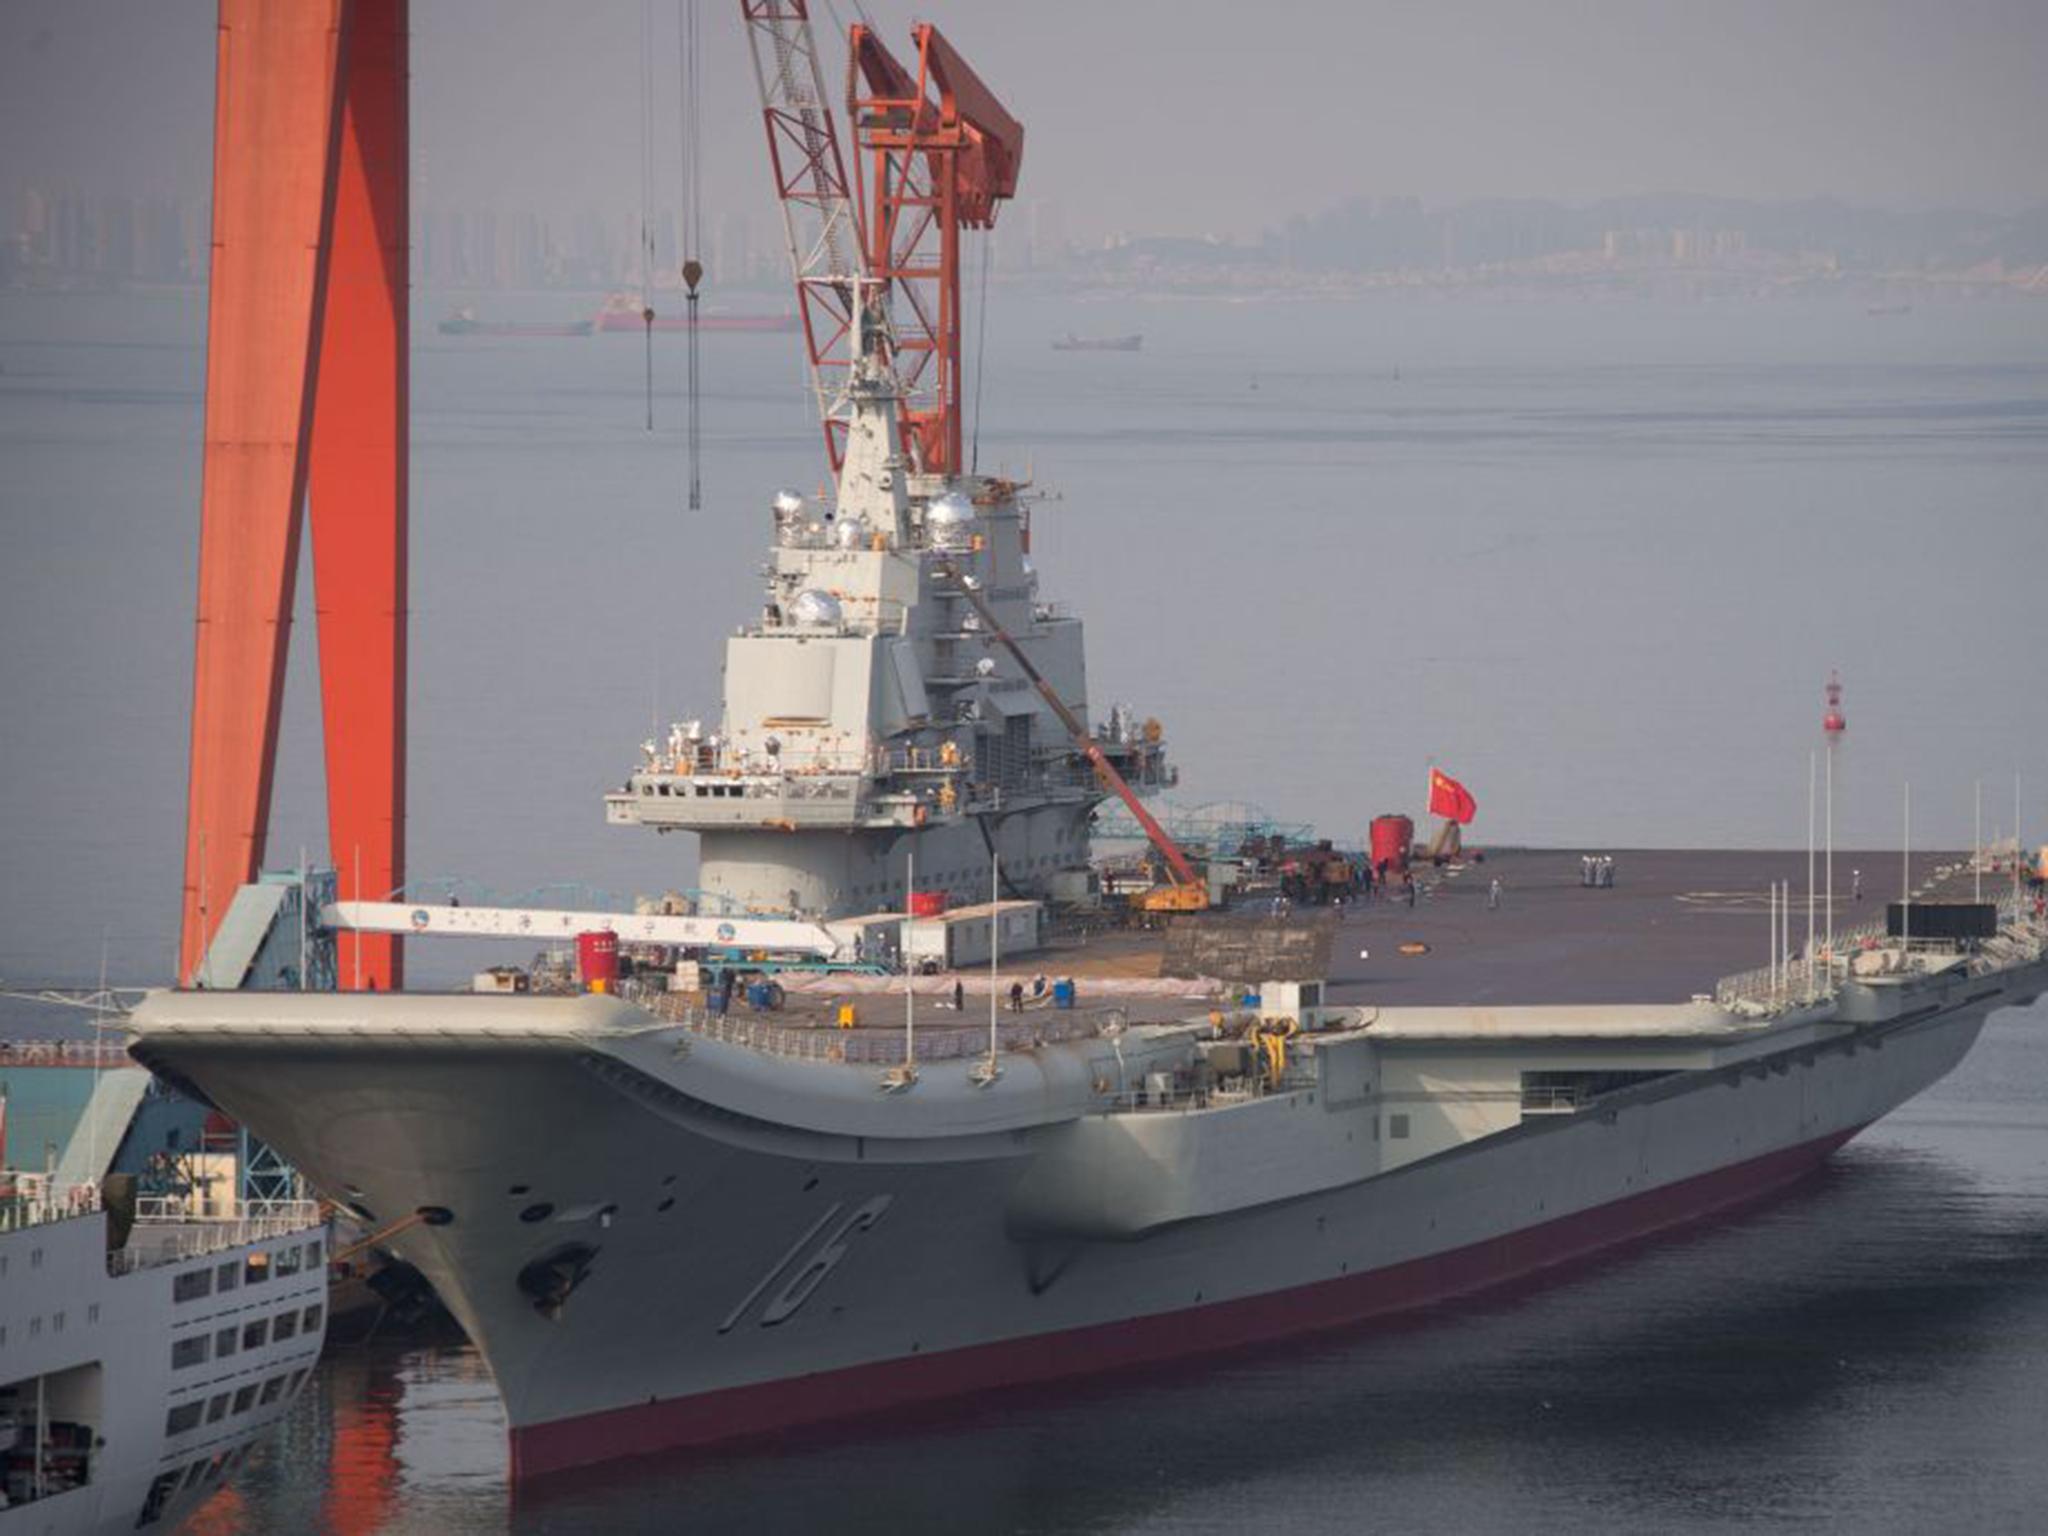 China’s ‘Liaoning’ aircraft carrier at the port of Dalian